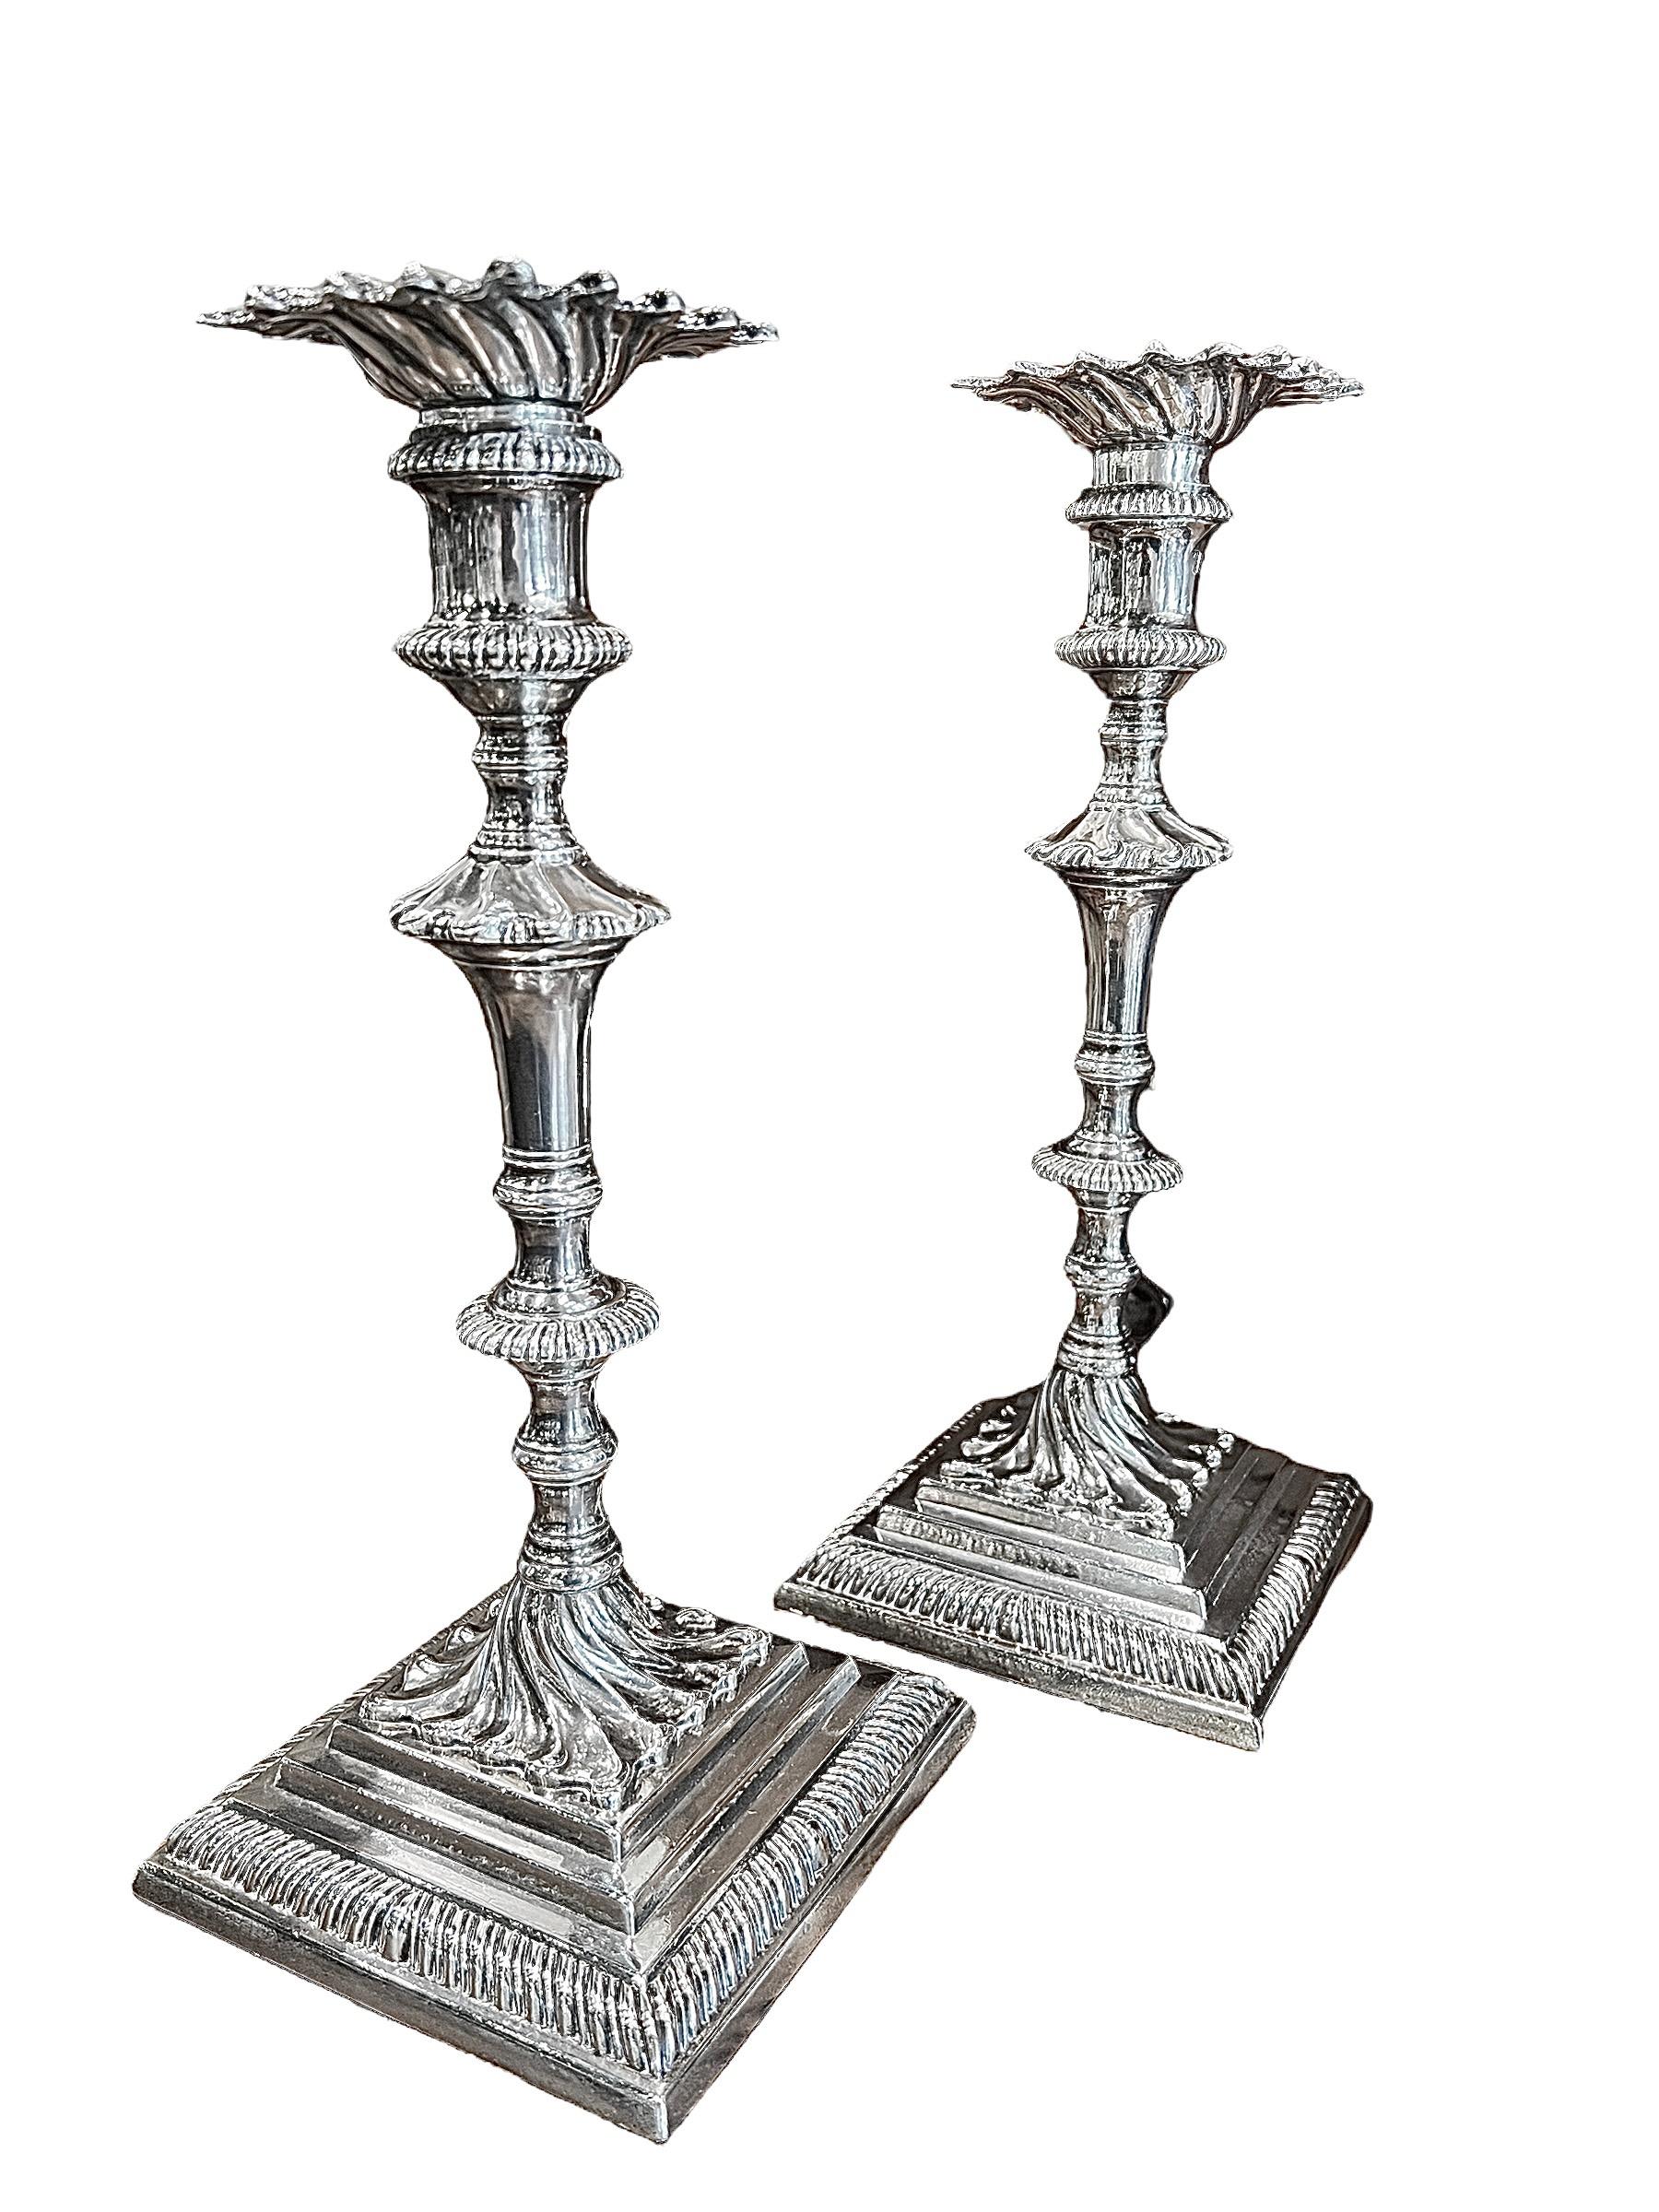 Hammered 1763 Pair of George III Sterling Silver Candlesticks by William Cafe, English For Sale